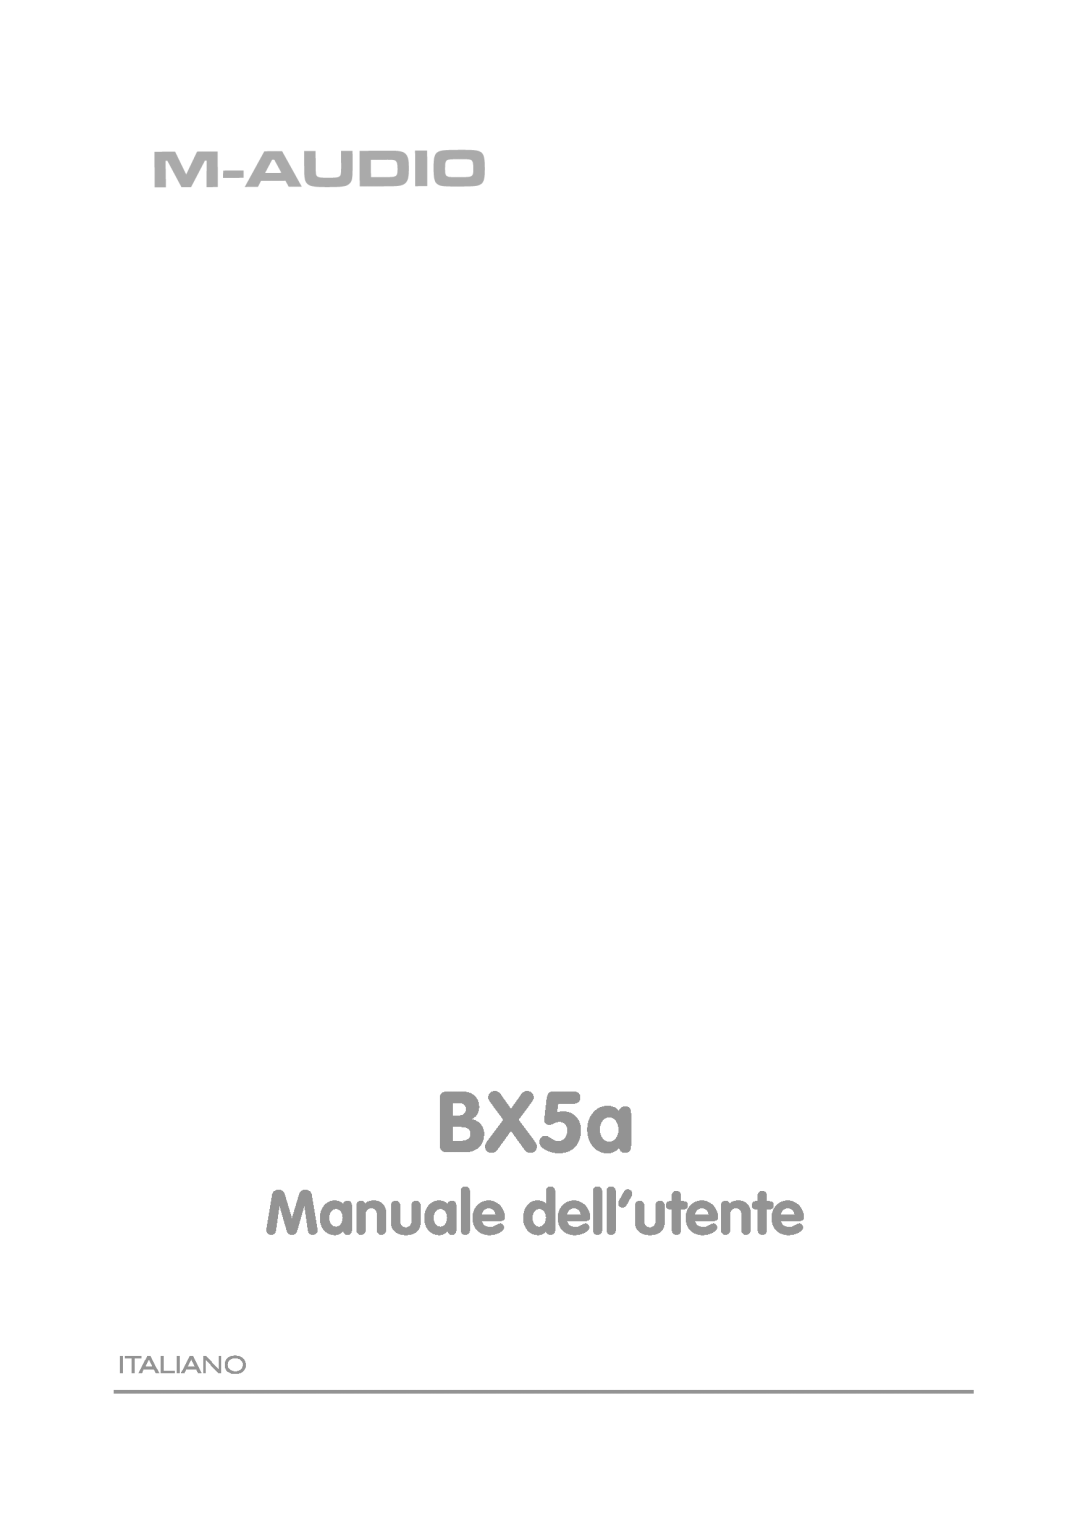 M-Audio BX5as manual Manuale dell’utente 